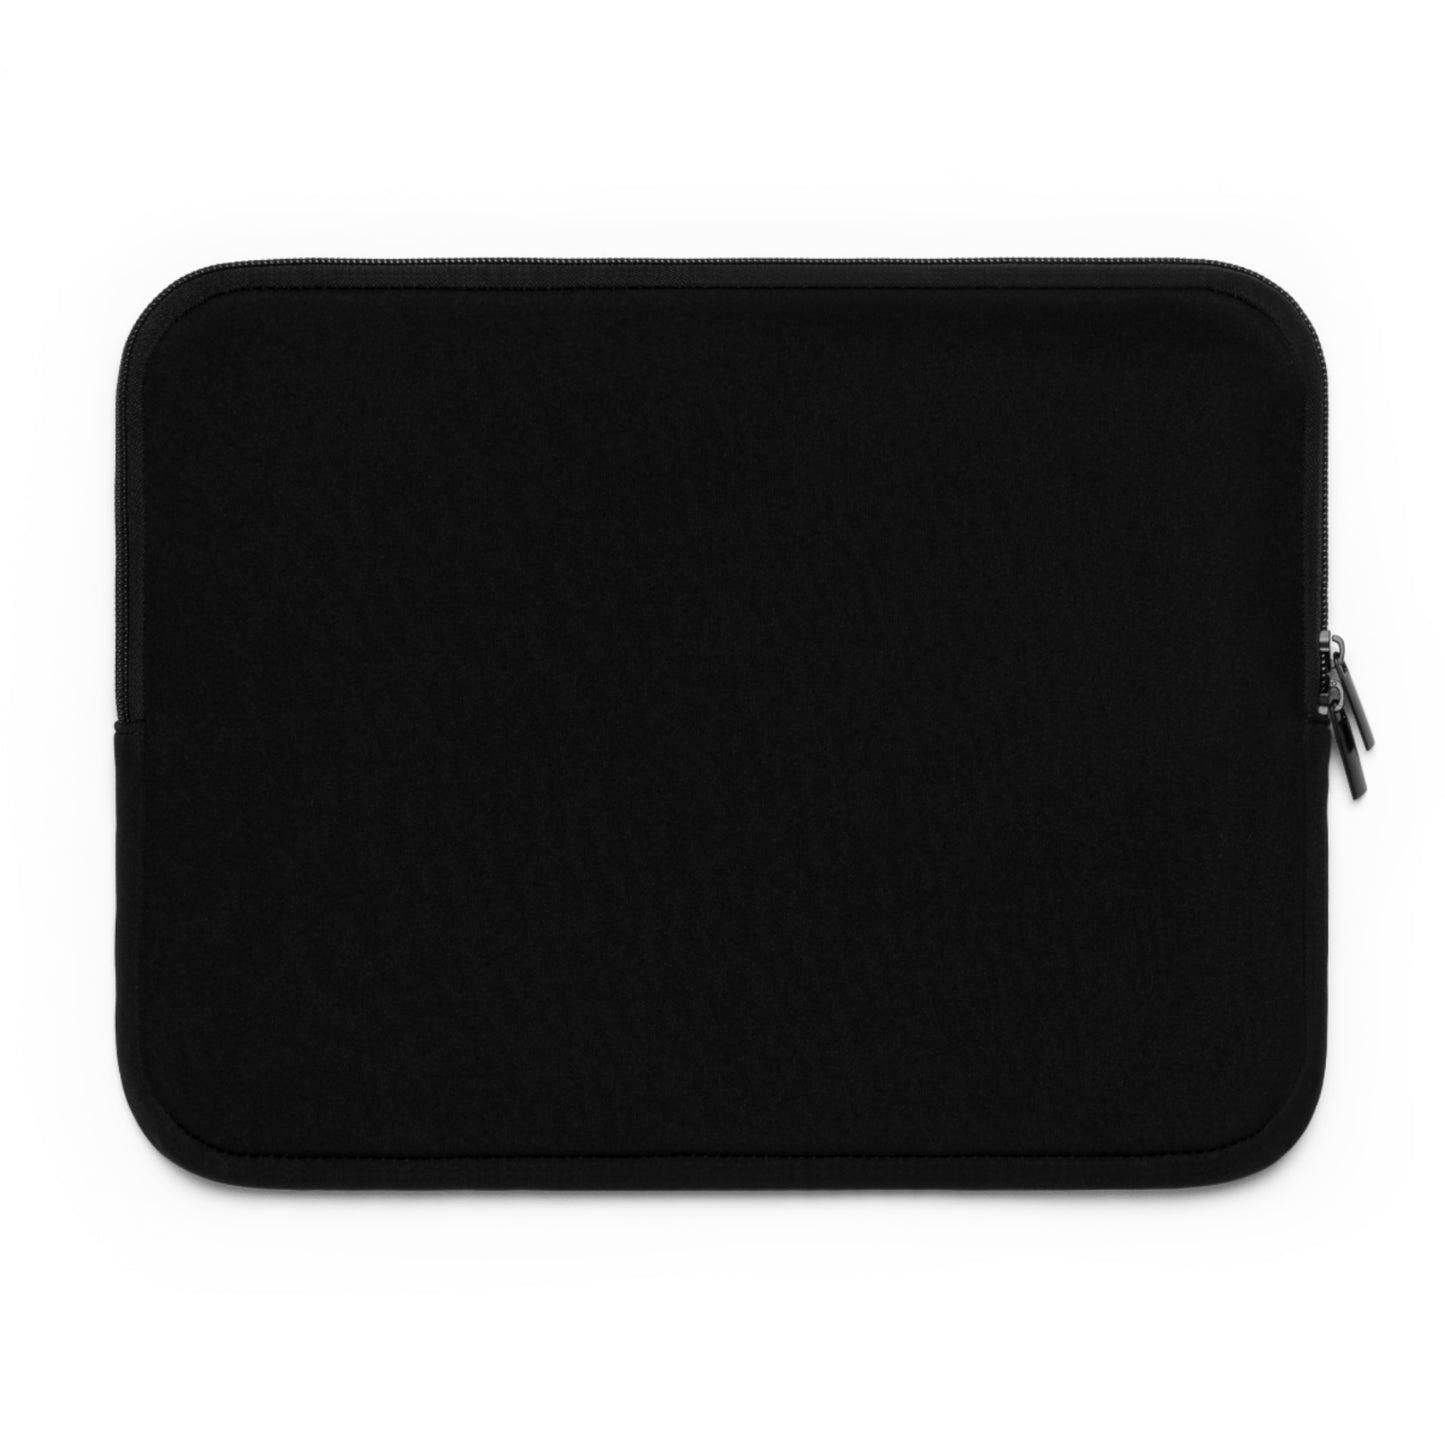 Sword and Scale Laptop Sleeve